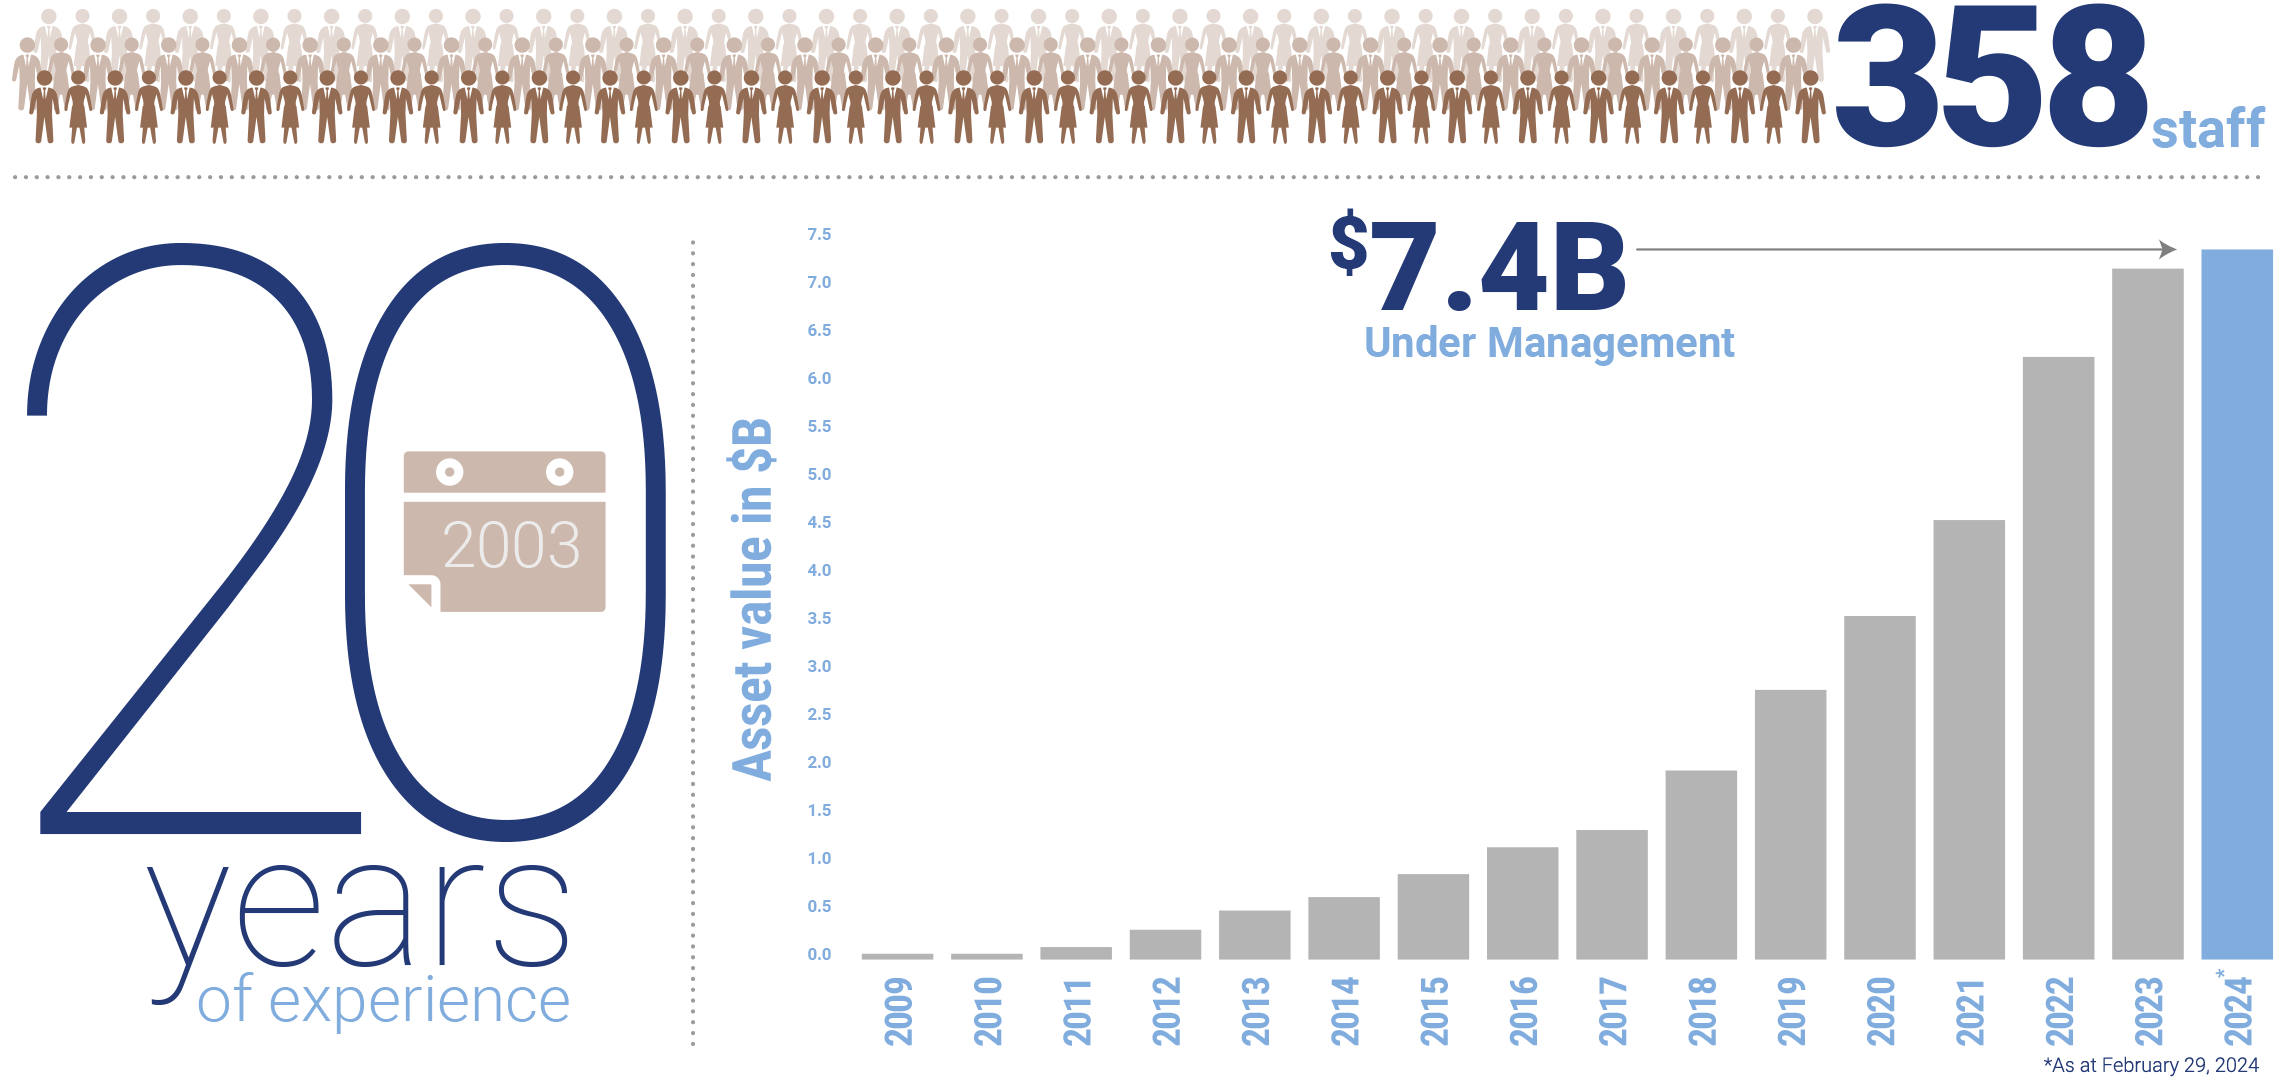 20 years of experience, 330 staff, over $6.3 billion under management as of December 31, 2022